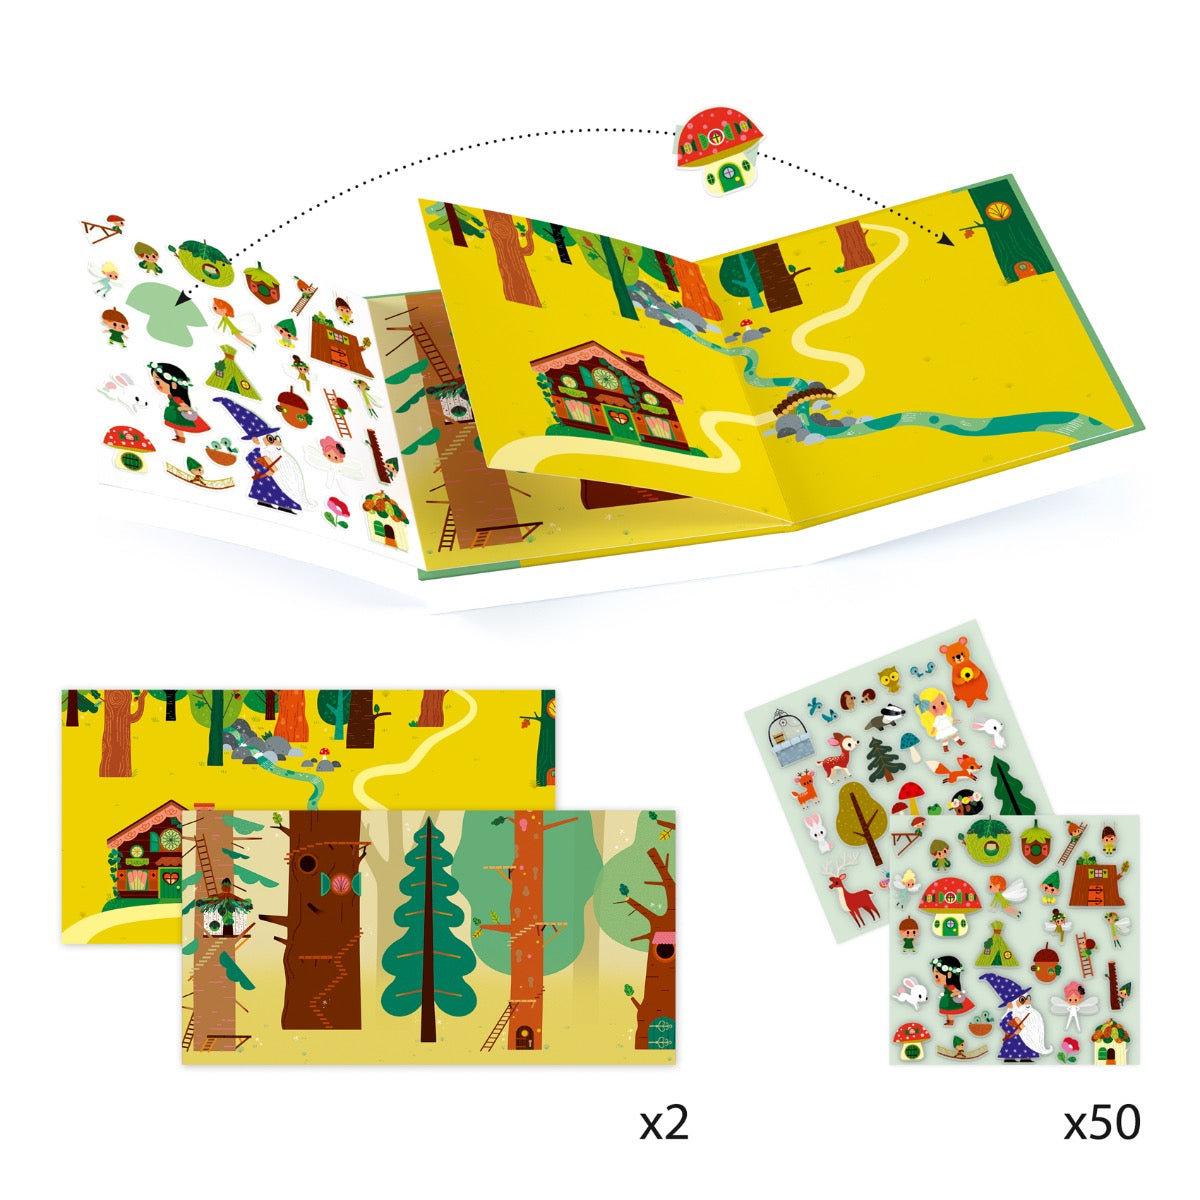 Djeco Sticker Stories - The Magical Forest